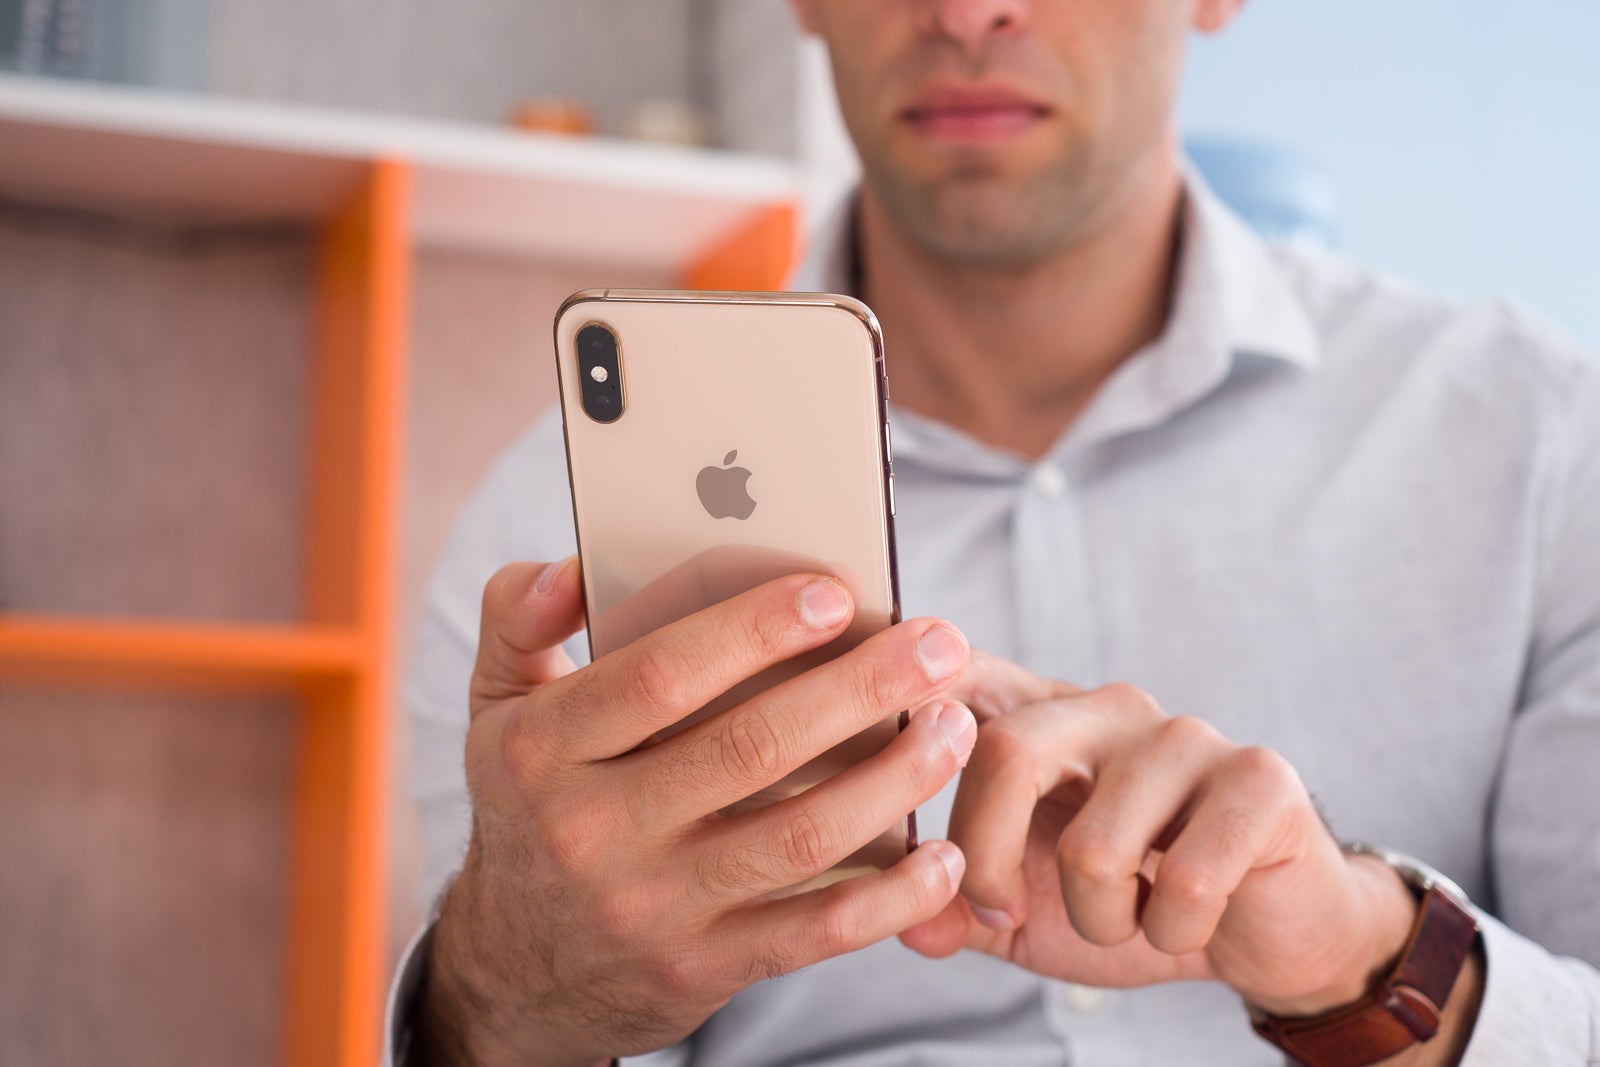 What your smartphone says about you: the "deeper" meaning behind the brands!